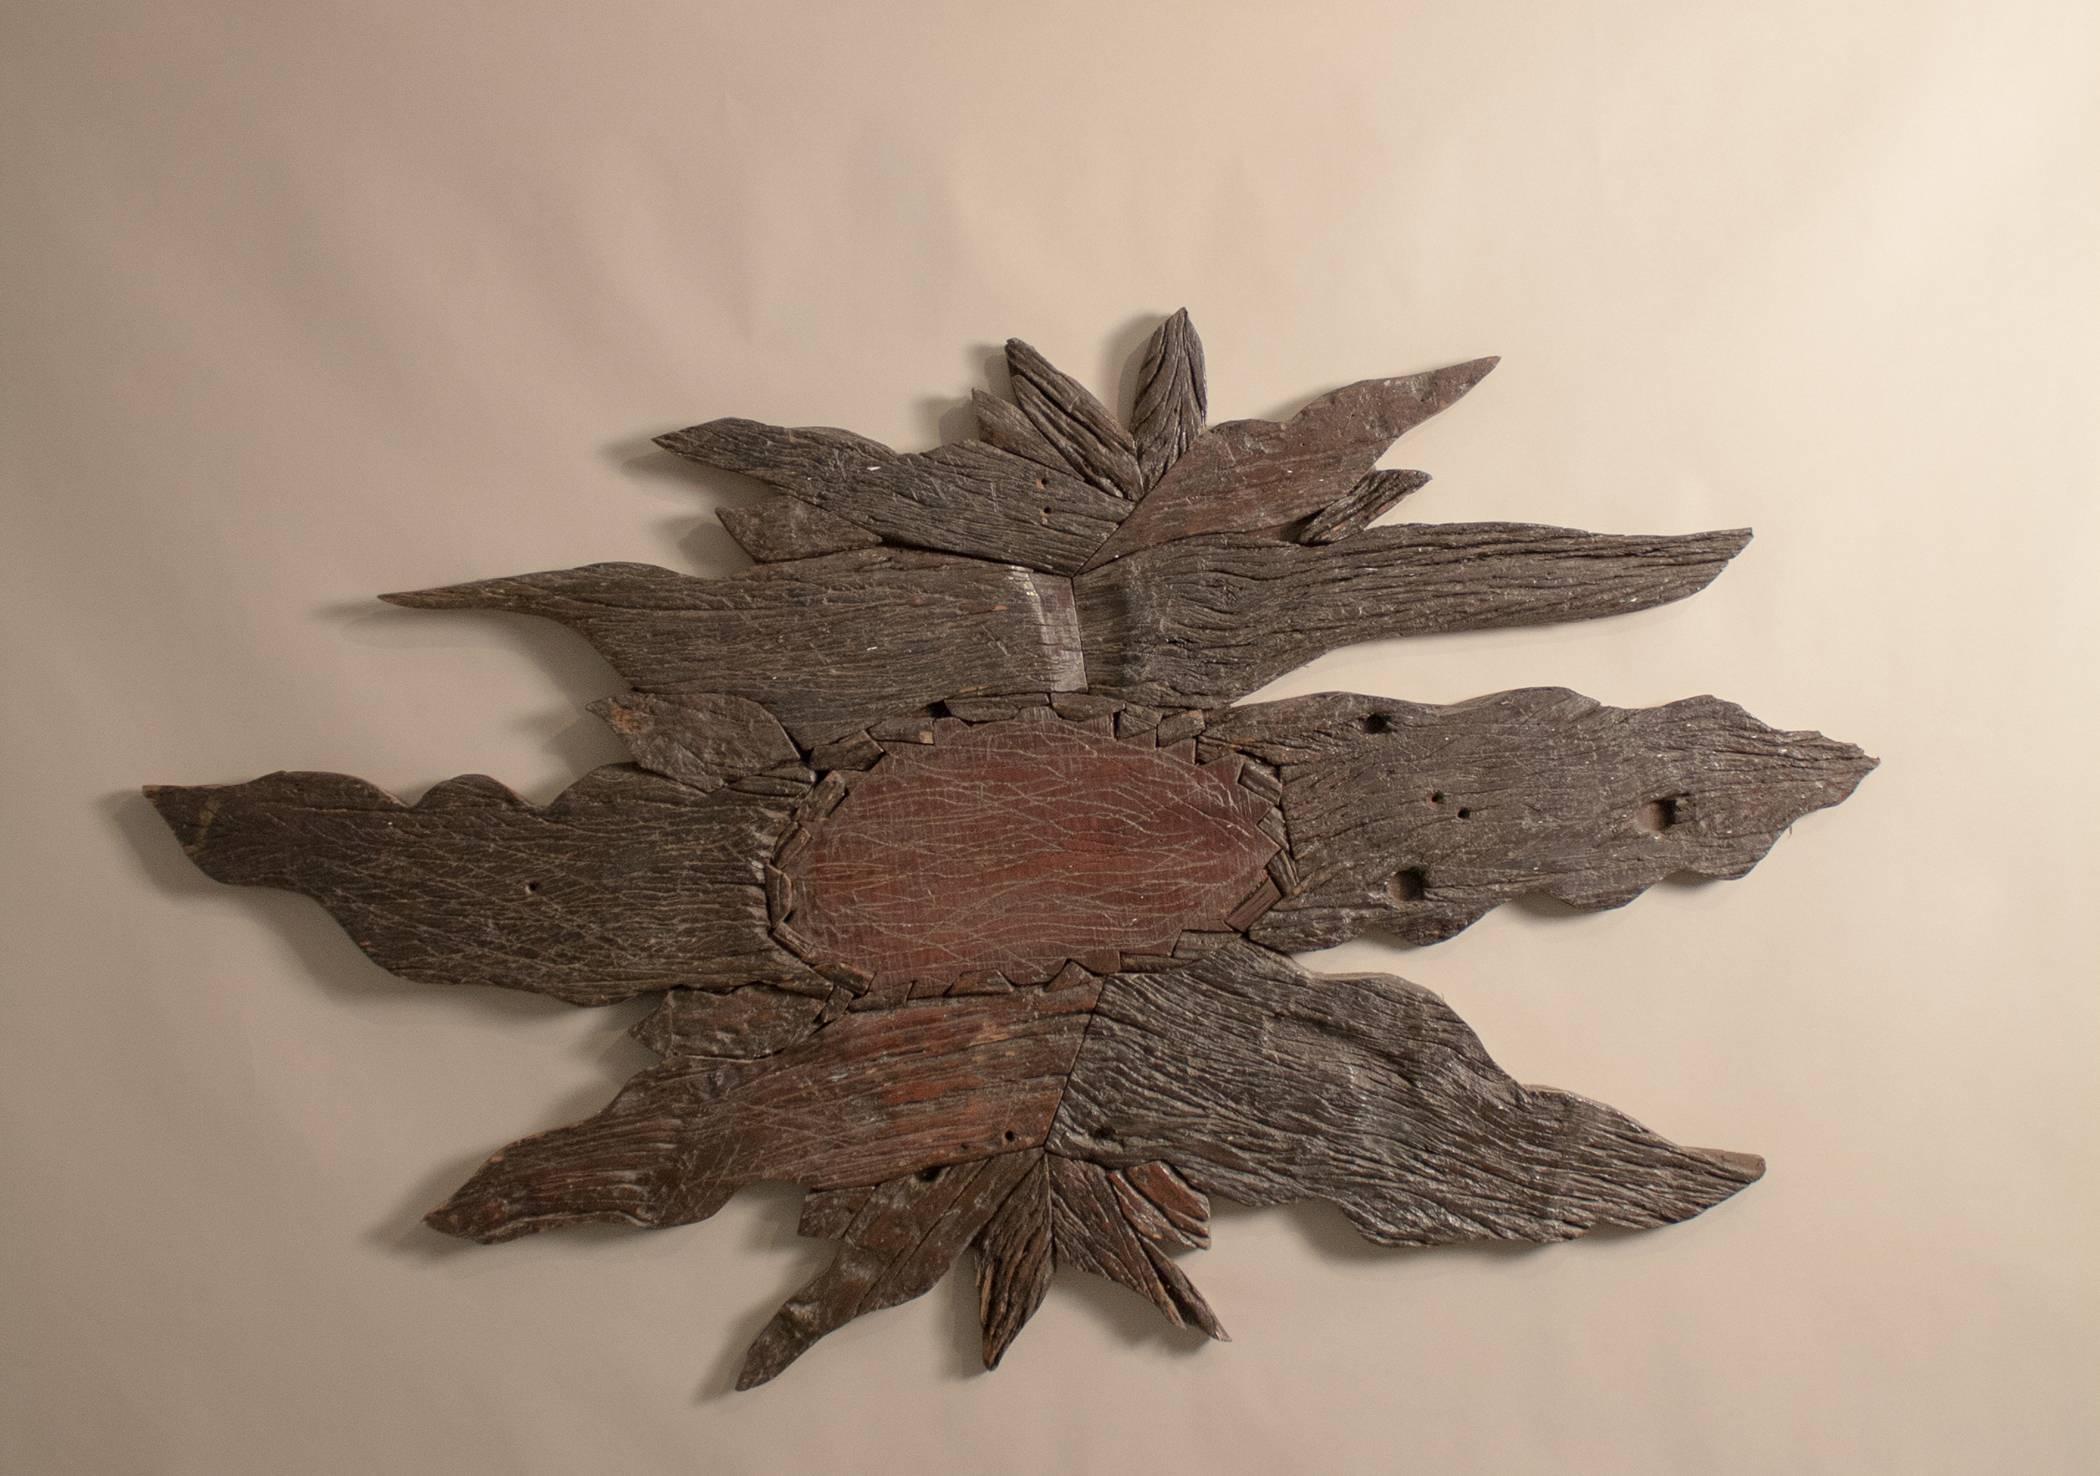 An organic Folk Art wall decoration crafted from attentively joined pieces of richly textured reclaimed hardwood. We see a nearly five feet by three feet sun or flower, but the panel is abstract enough to be open to interpretation and hung